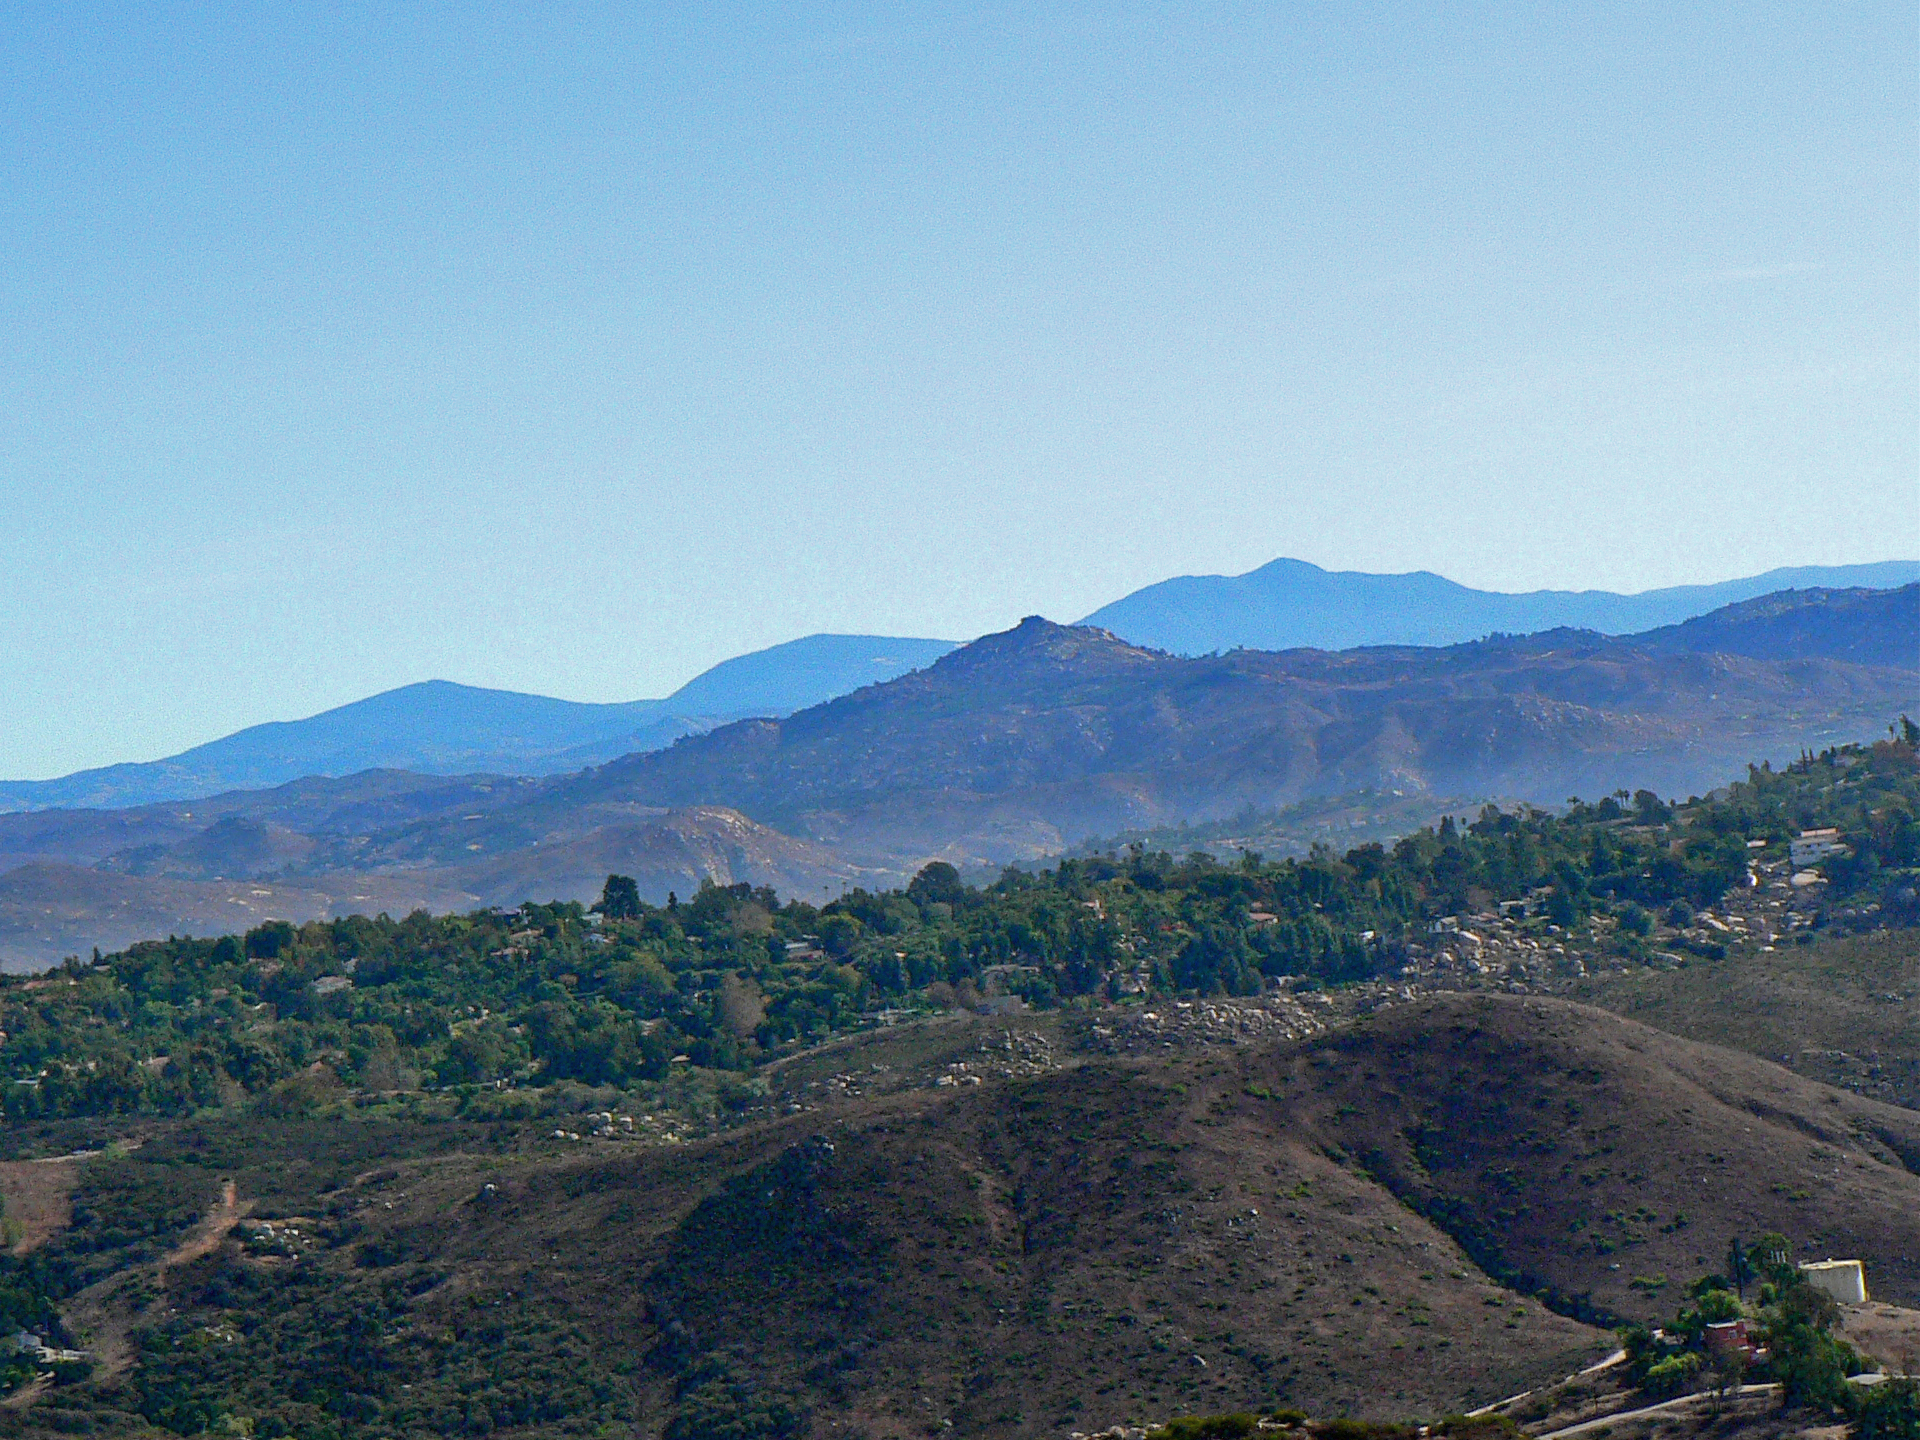 View of Starvation Mtn. (front) & Cuyamaca Mountains (back) from trail.